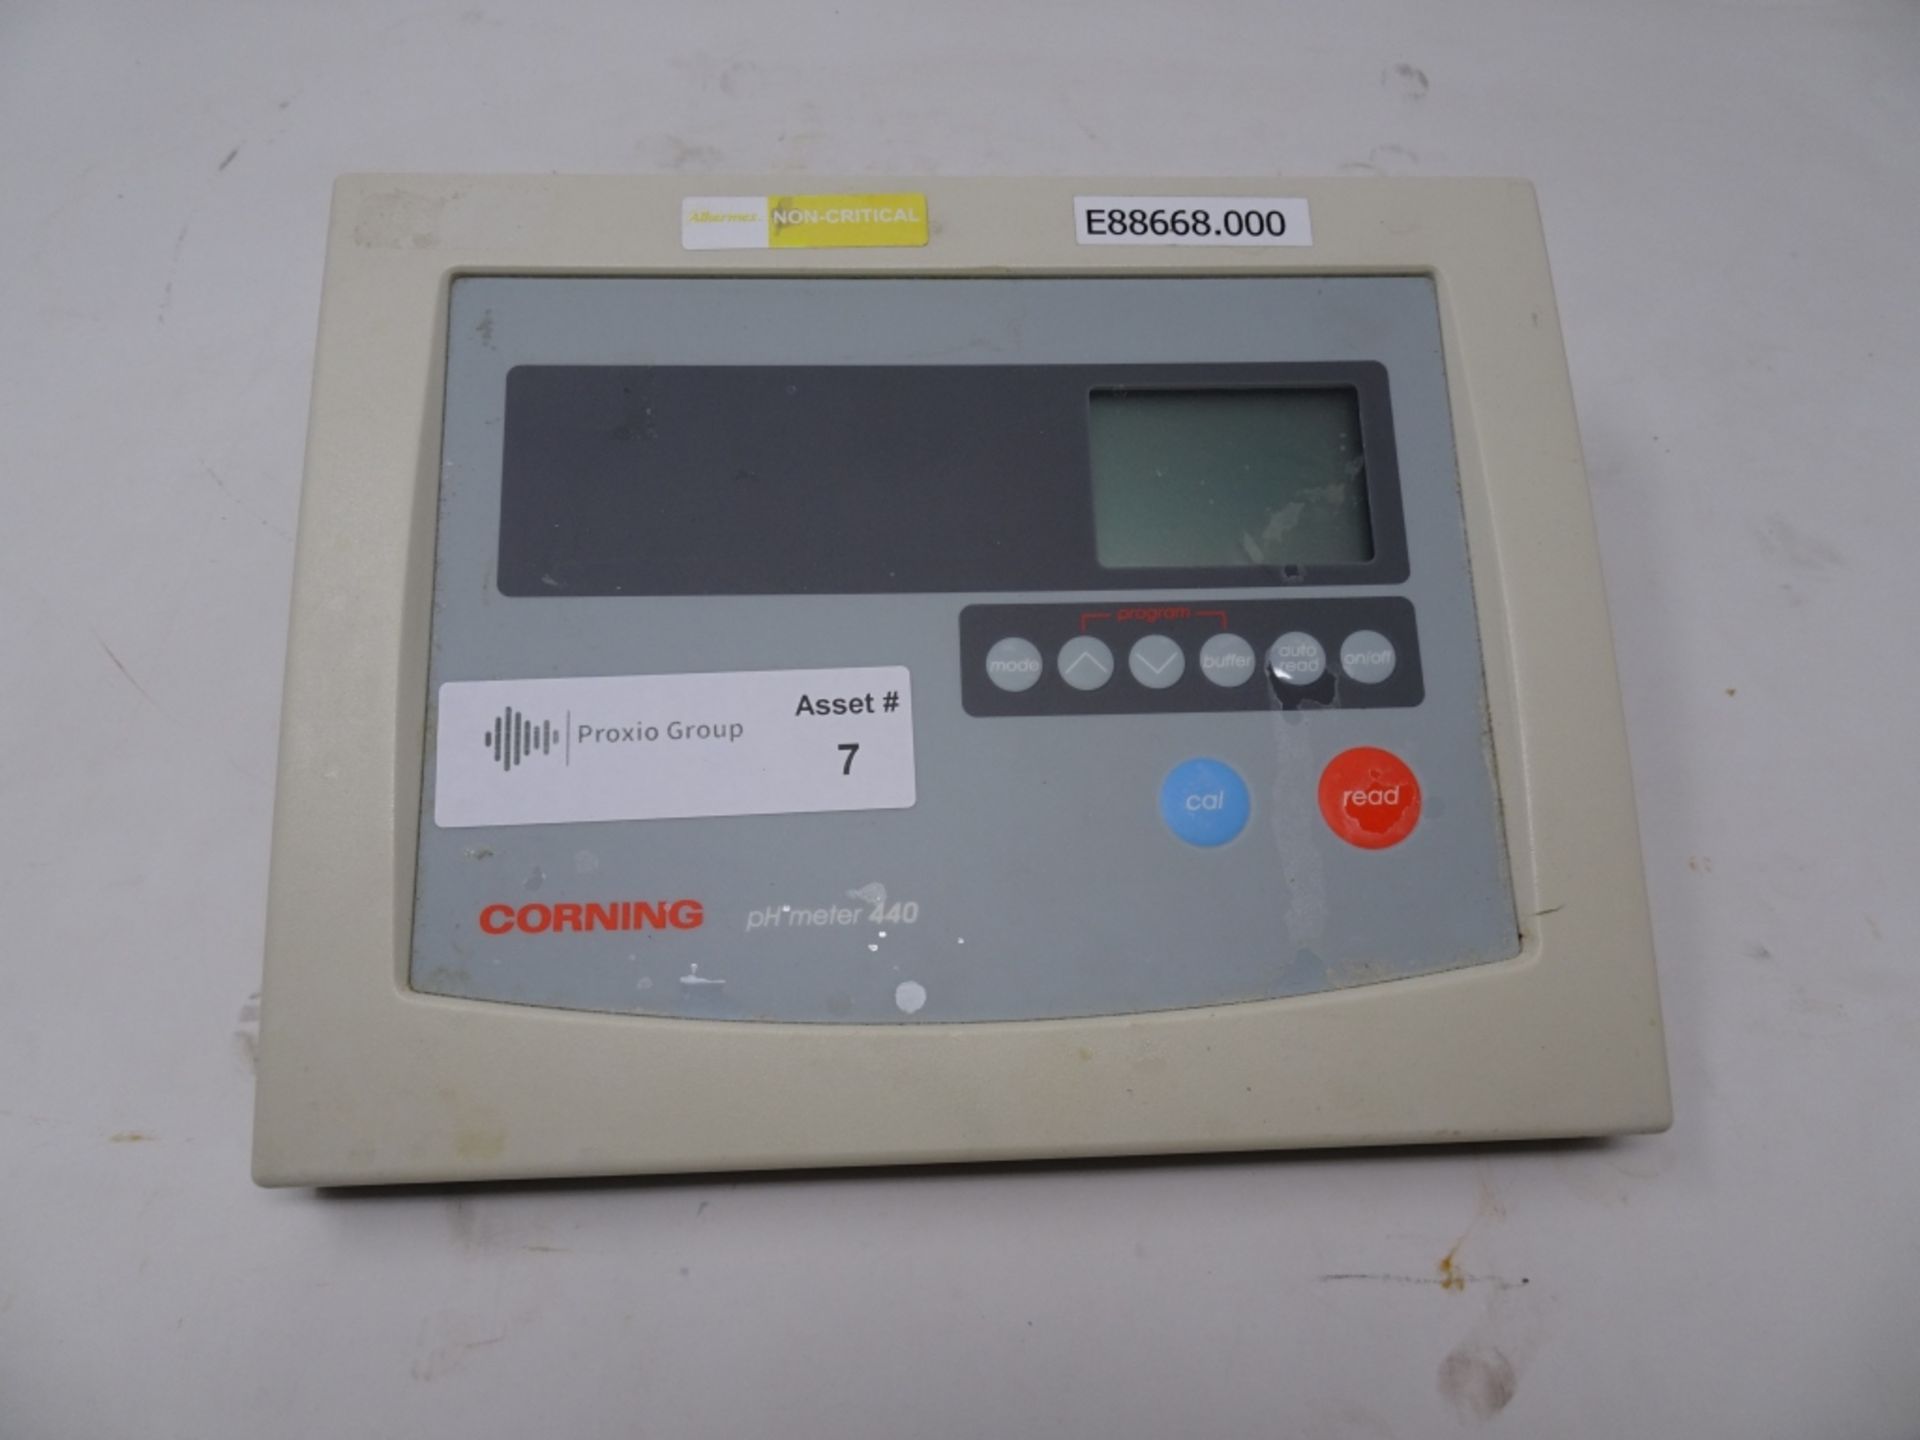 Corning 440 Ph Meter s/n 4601, Accounting Inventory Number E88668.000.